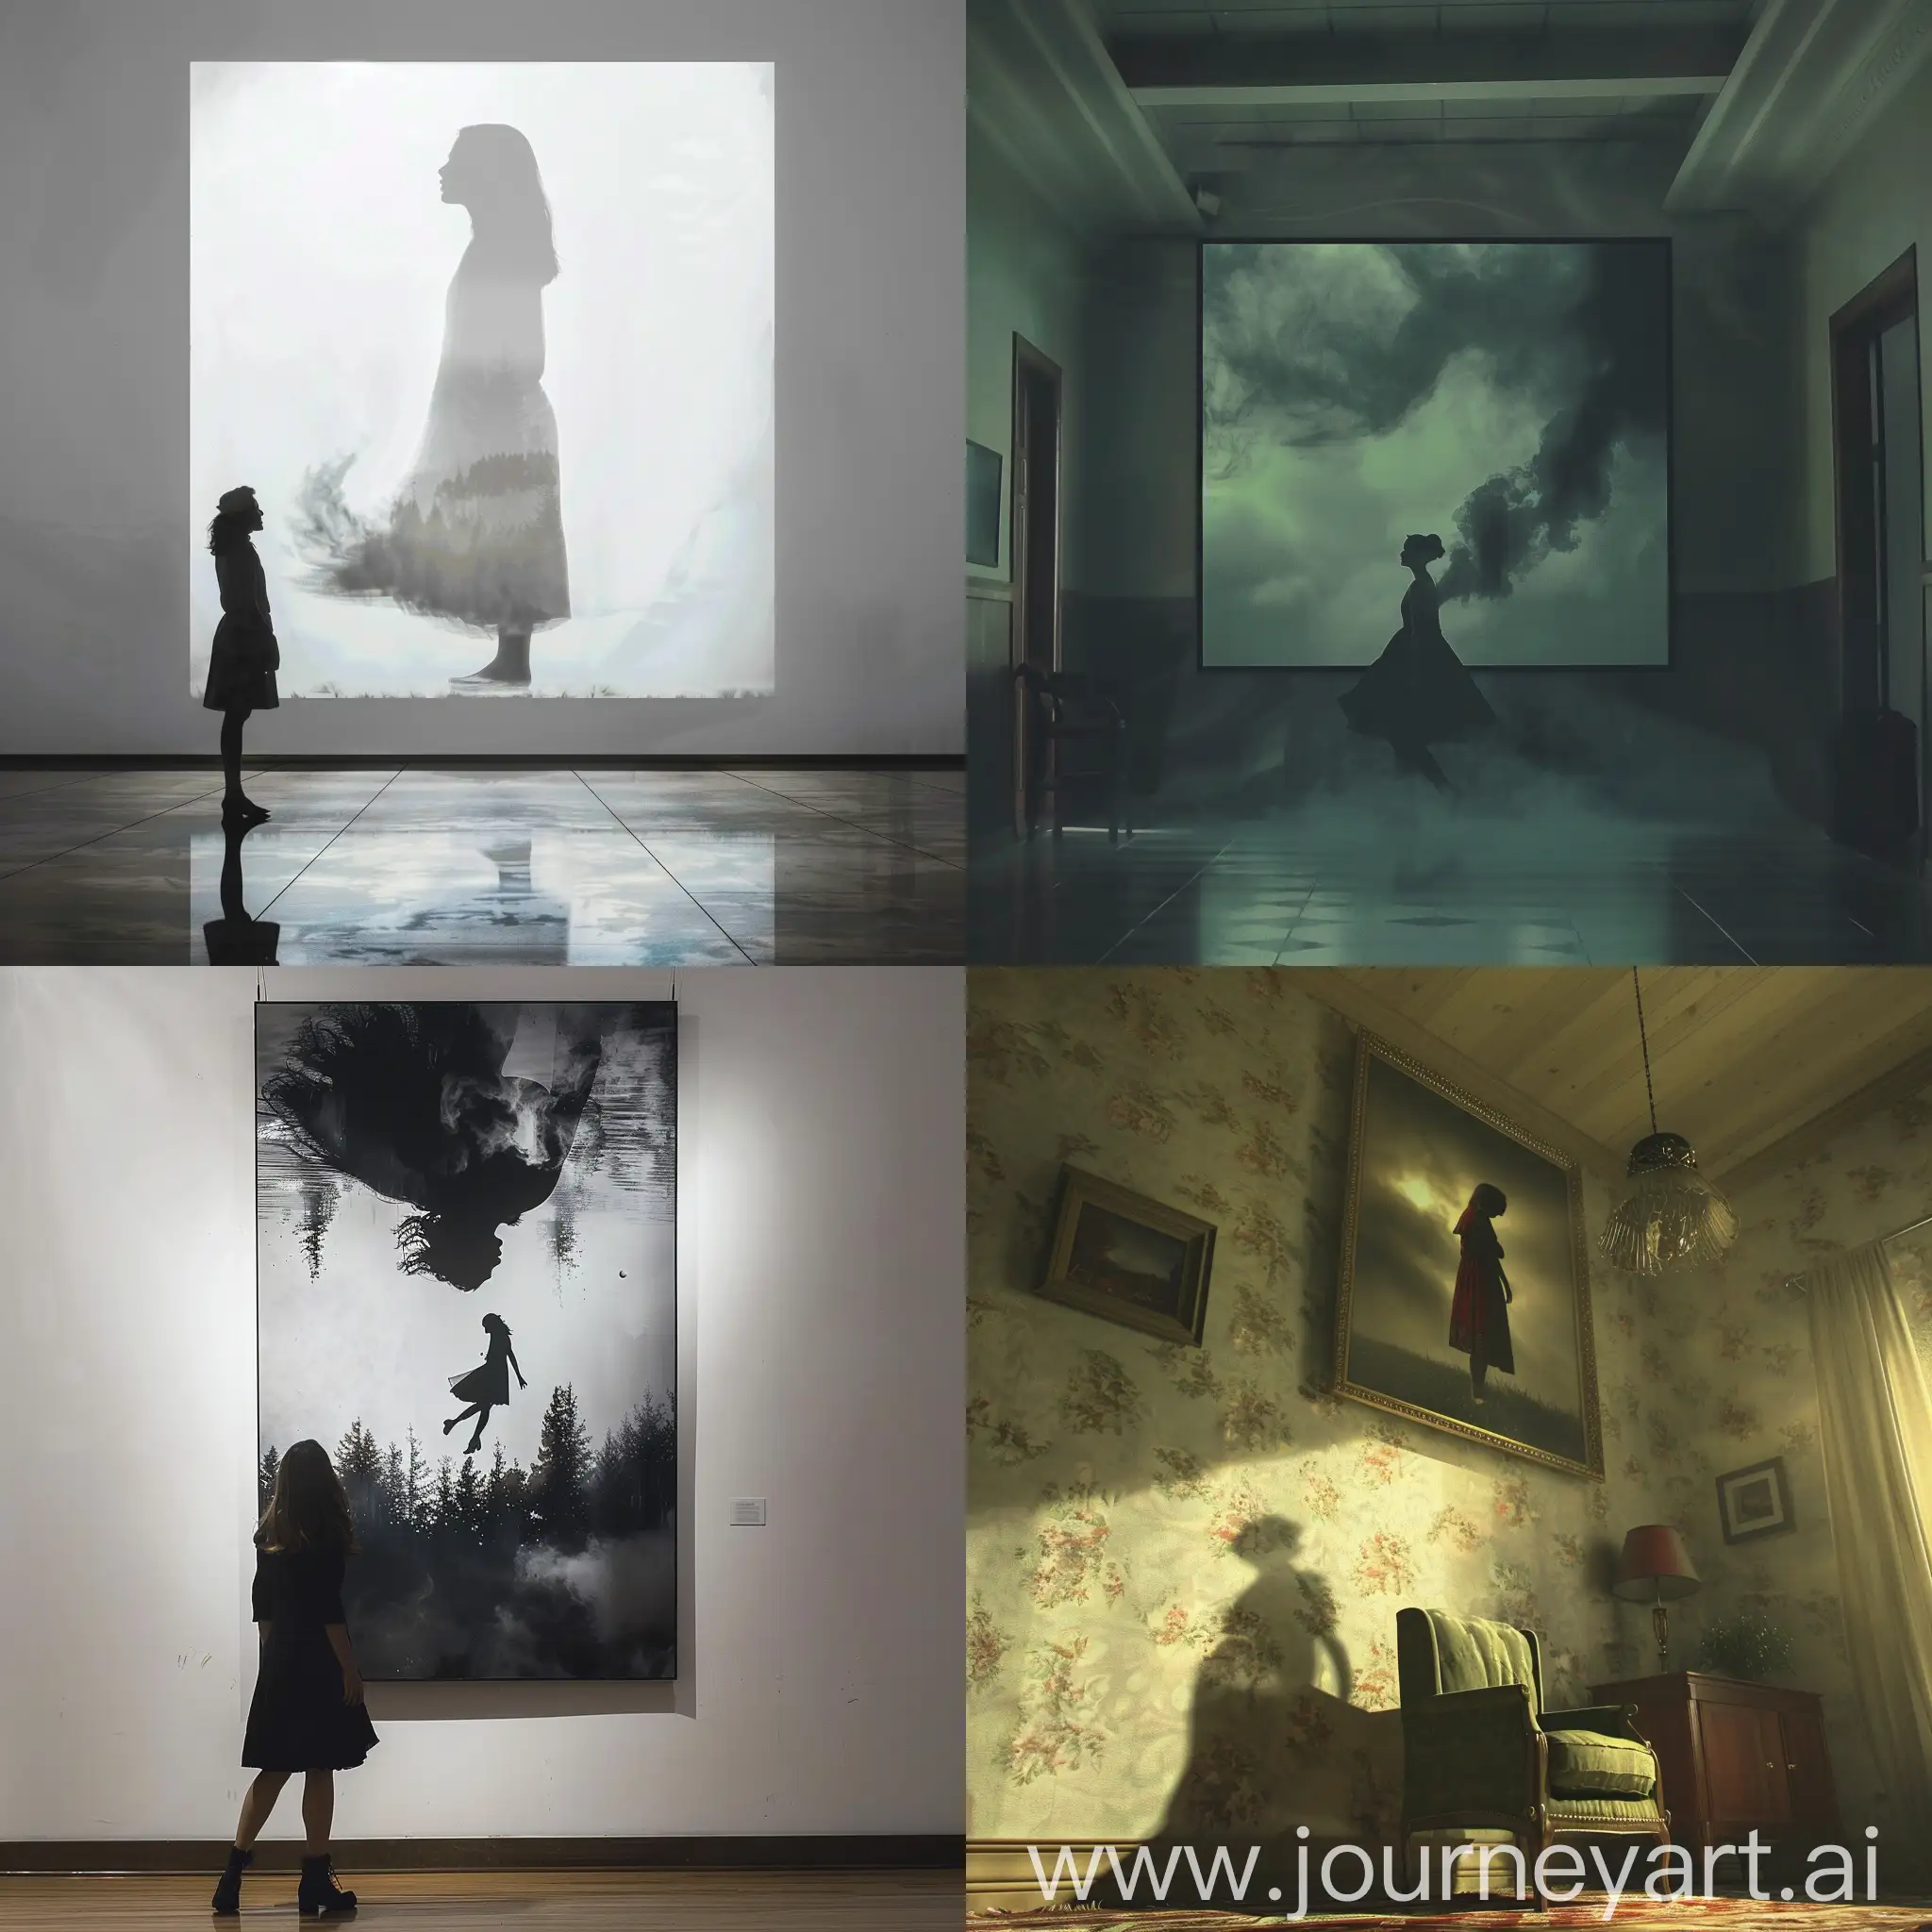 A realistic depiction of a surreal scene and a surreal phenomenon, a huge photograph of a woman hangs on the wall, from which a slightly transparent silhouette of this woman separates and descends from the photo into the real world